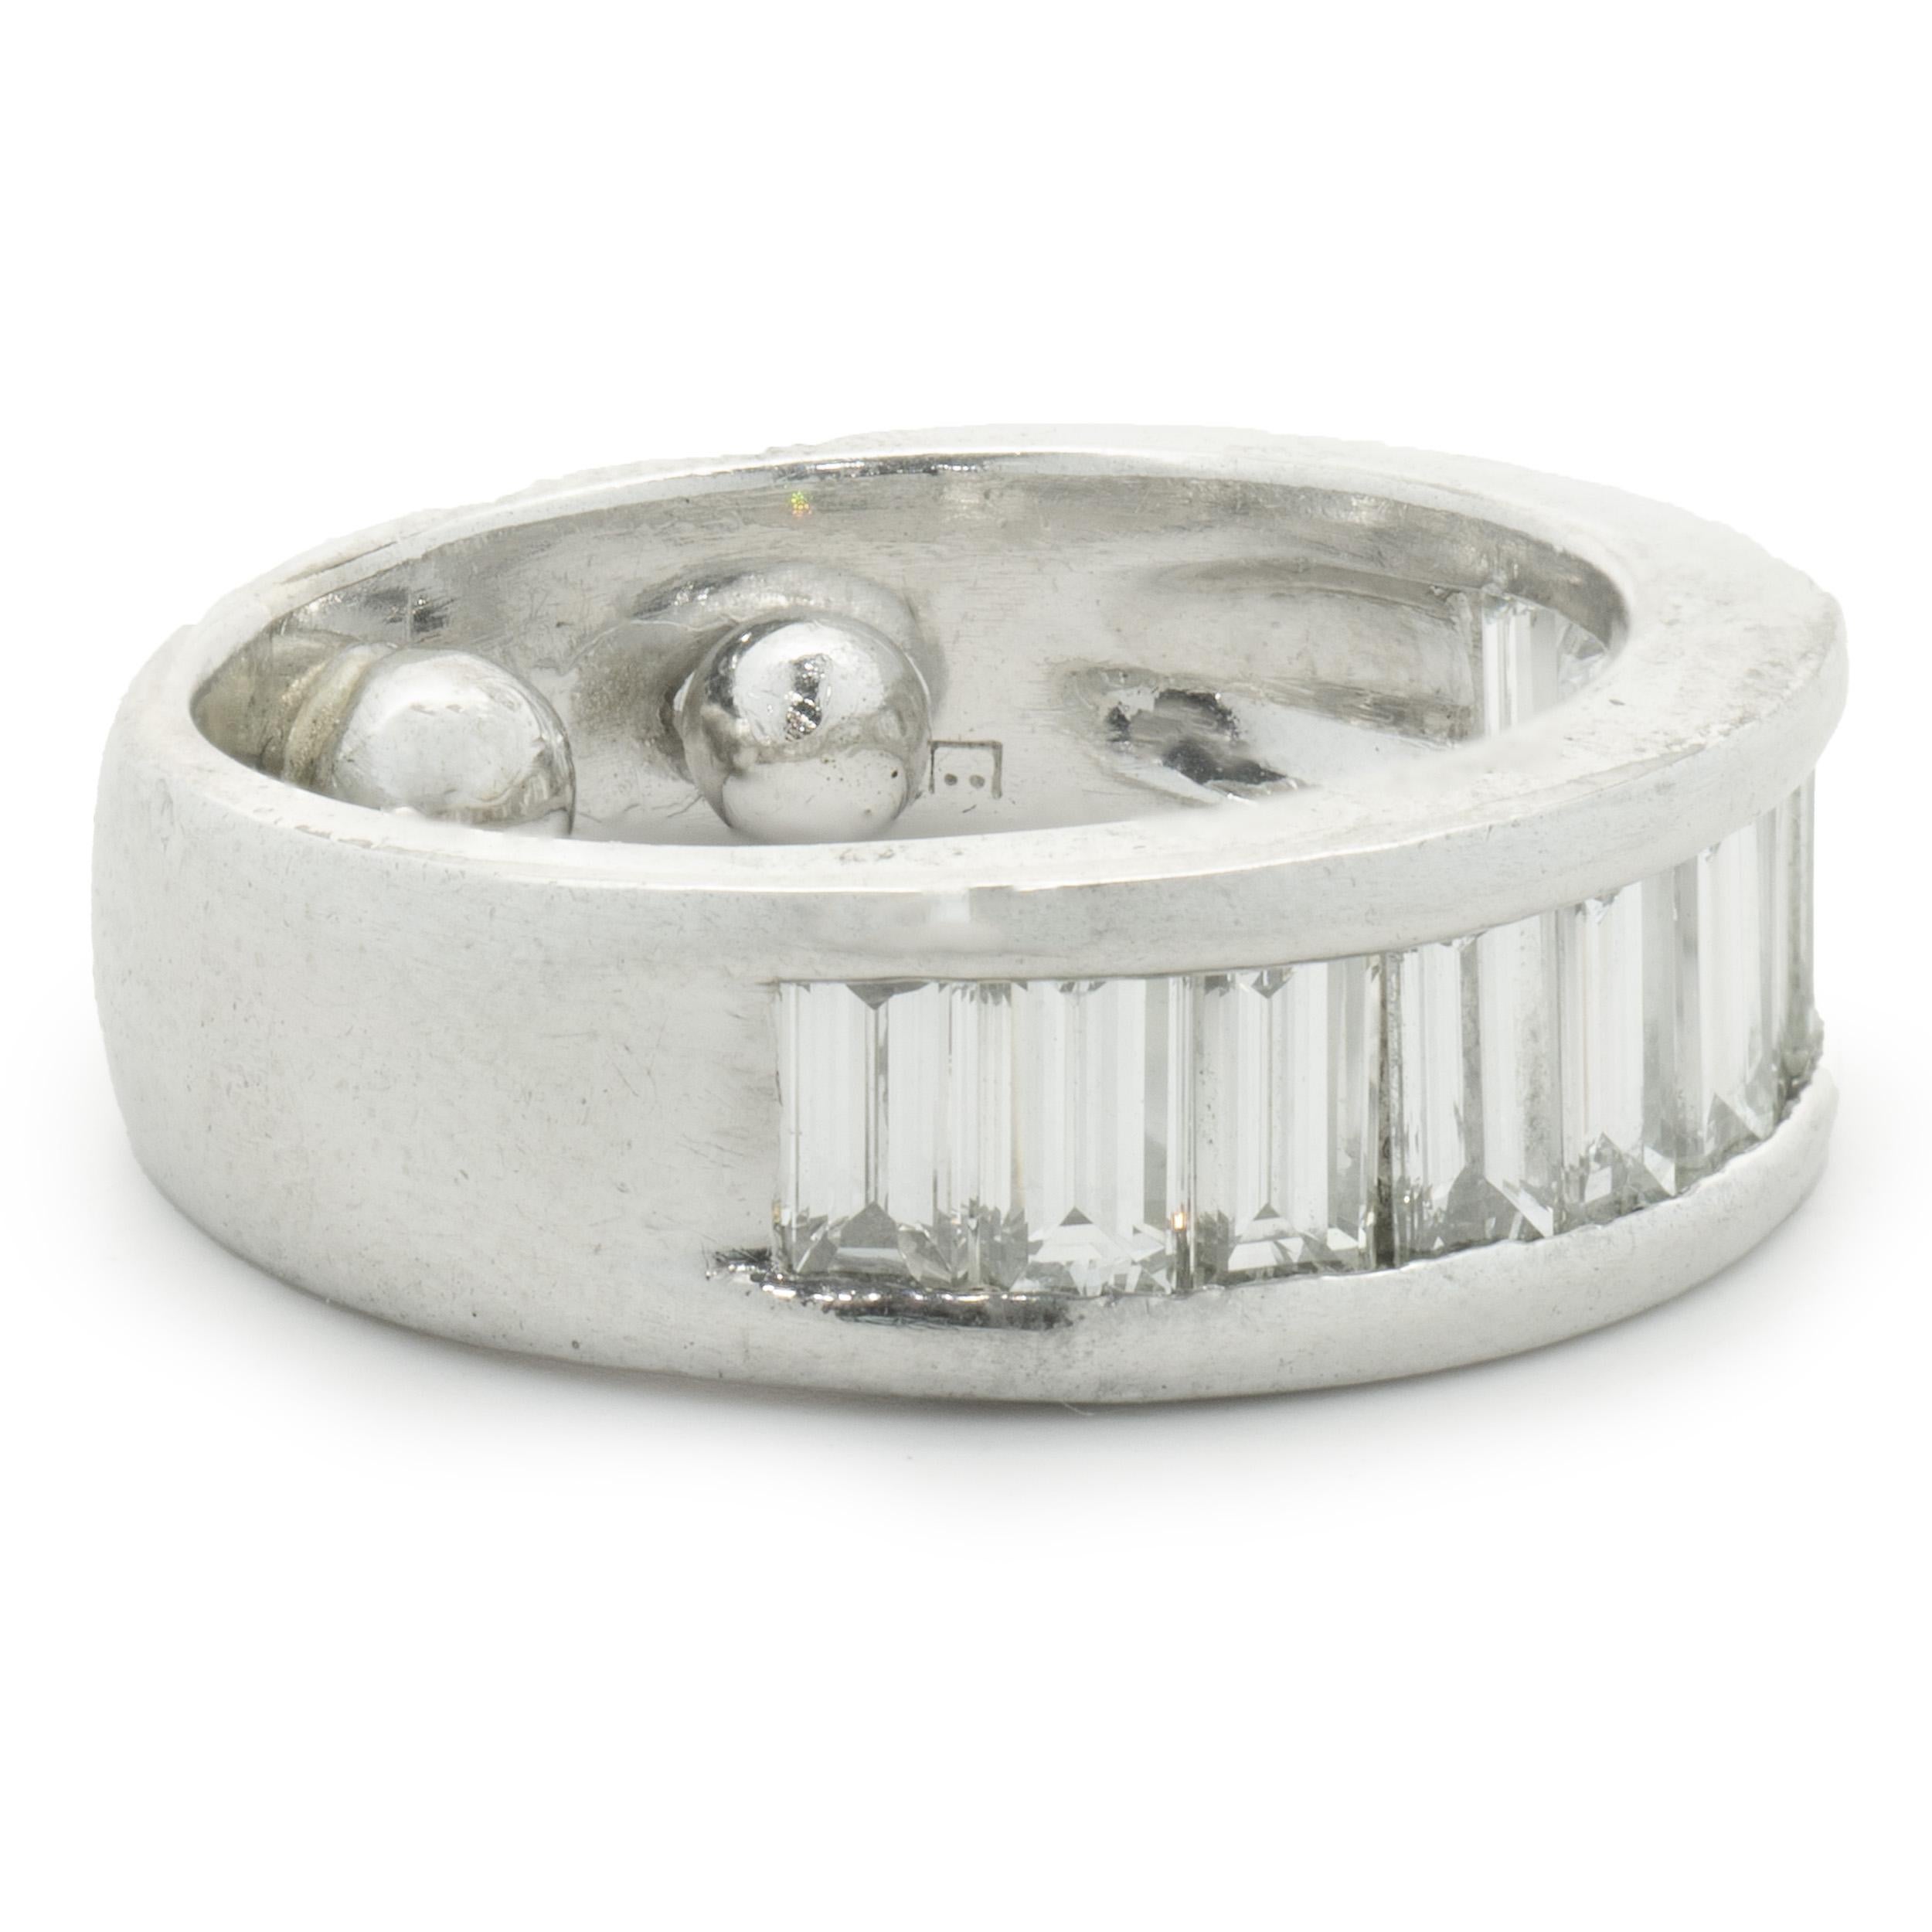 Designer: Custom
Material: Platinum
Diamonds: 11 baguette cut = 1.32cttw
Color: H
Clarity: SI1
Size: 4 sizing available 
Dimensions: ring measures 7mm in width
Weight: 11.63 grams